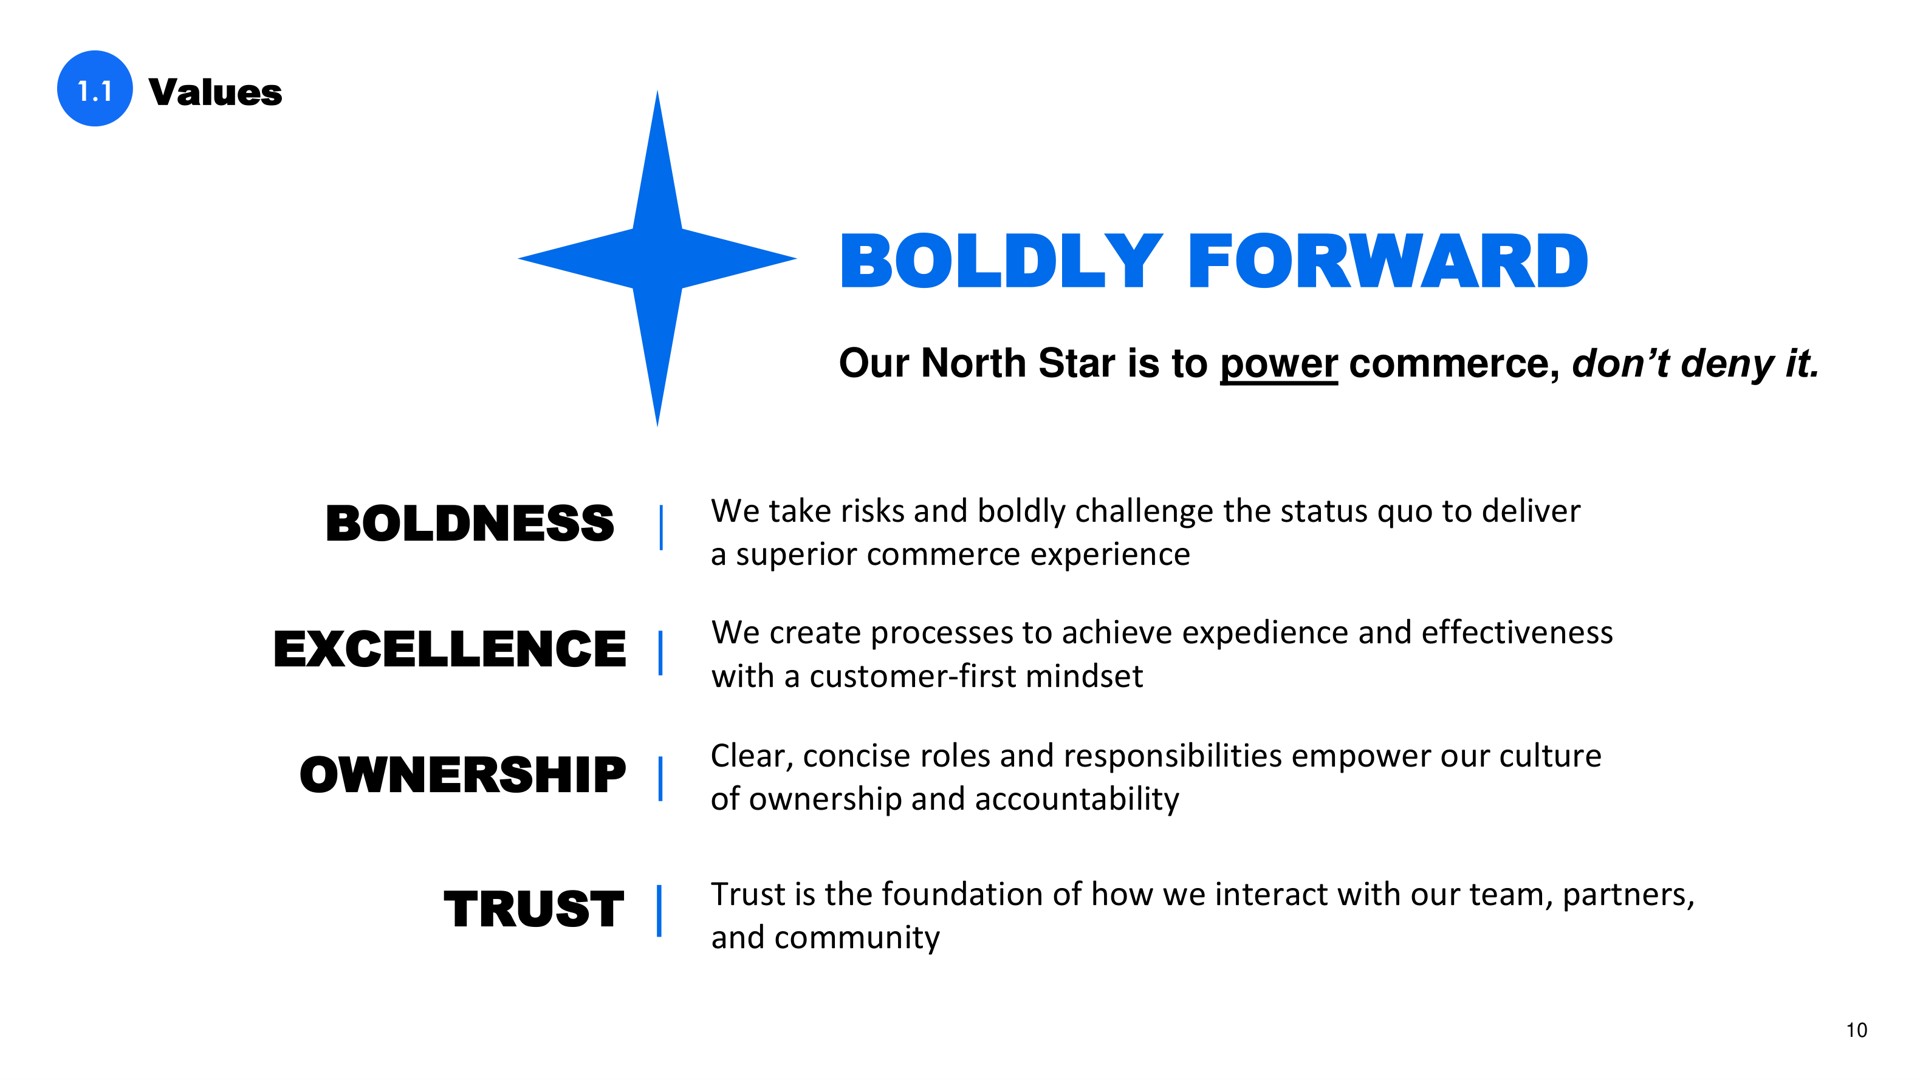 values boldly forward our north star is to power commerce don deny it boldness we take risks and boldly challenge the status quo to deliver a superior commerce experience excellence we create processes to achieve expedience and effectiveness with a customer first ownership clear concise roles and responsibilities empower our culture of ownership and accountability trust trust is the foundation of how we interact with our team partners and community | Shift4